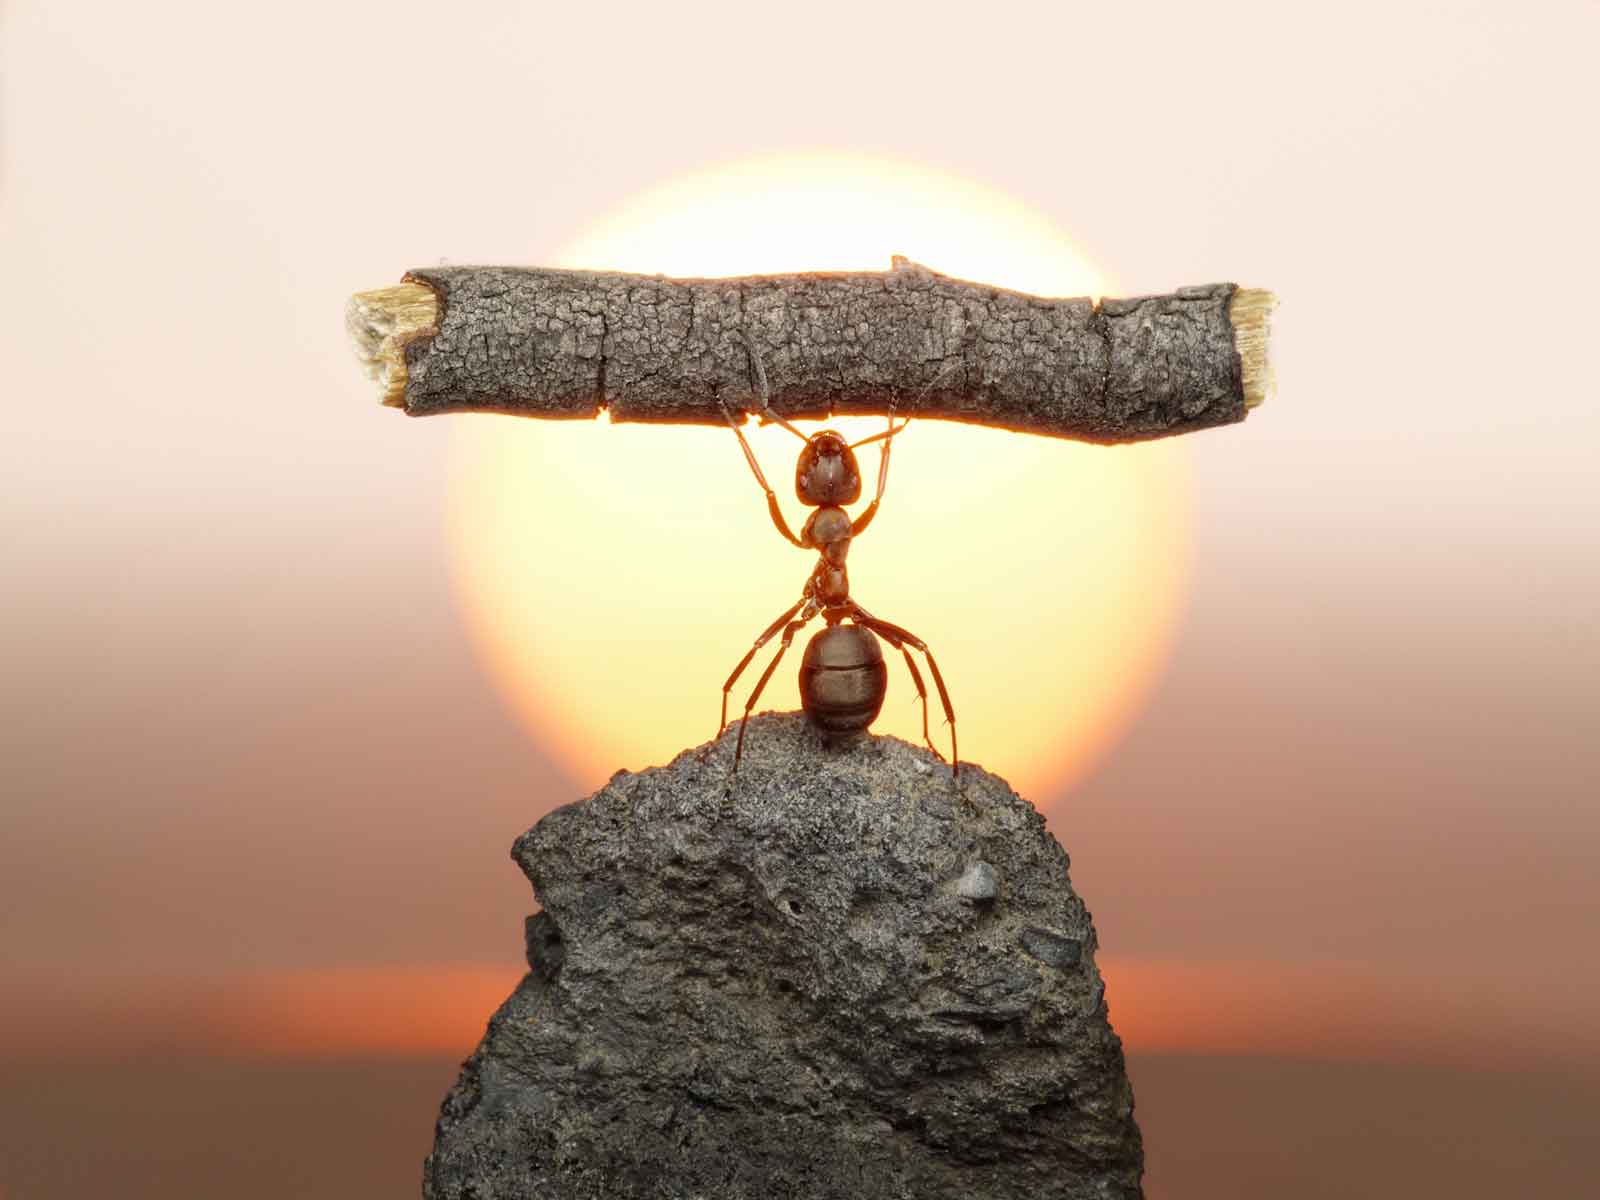 An an holds a big stick aloft, symbolising capability building. It's a really cute pic. This ant is a dude.